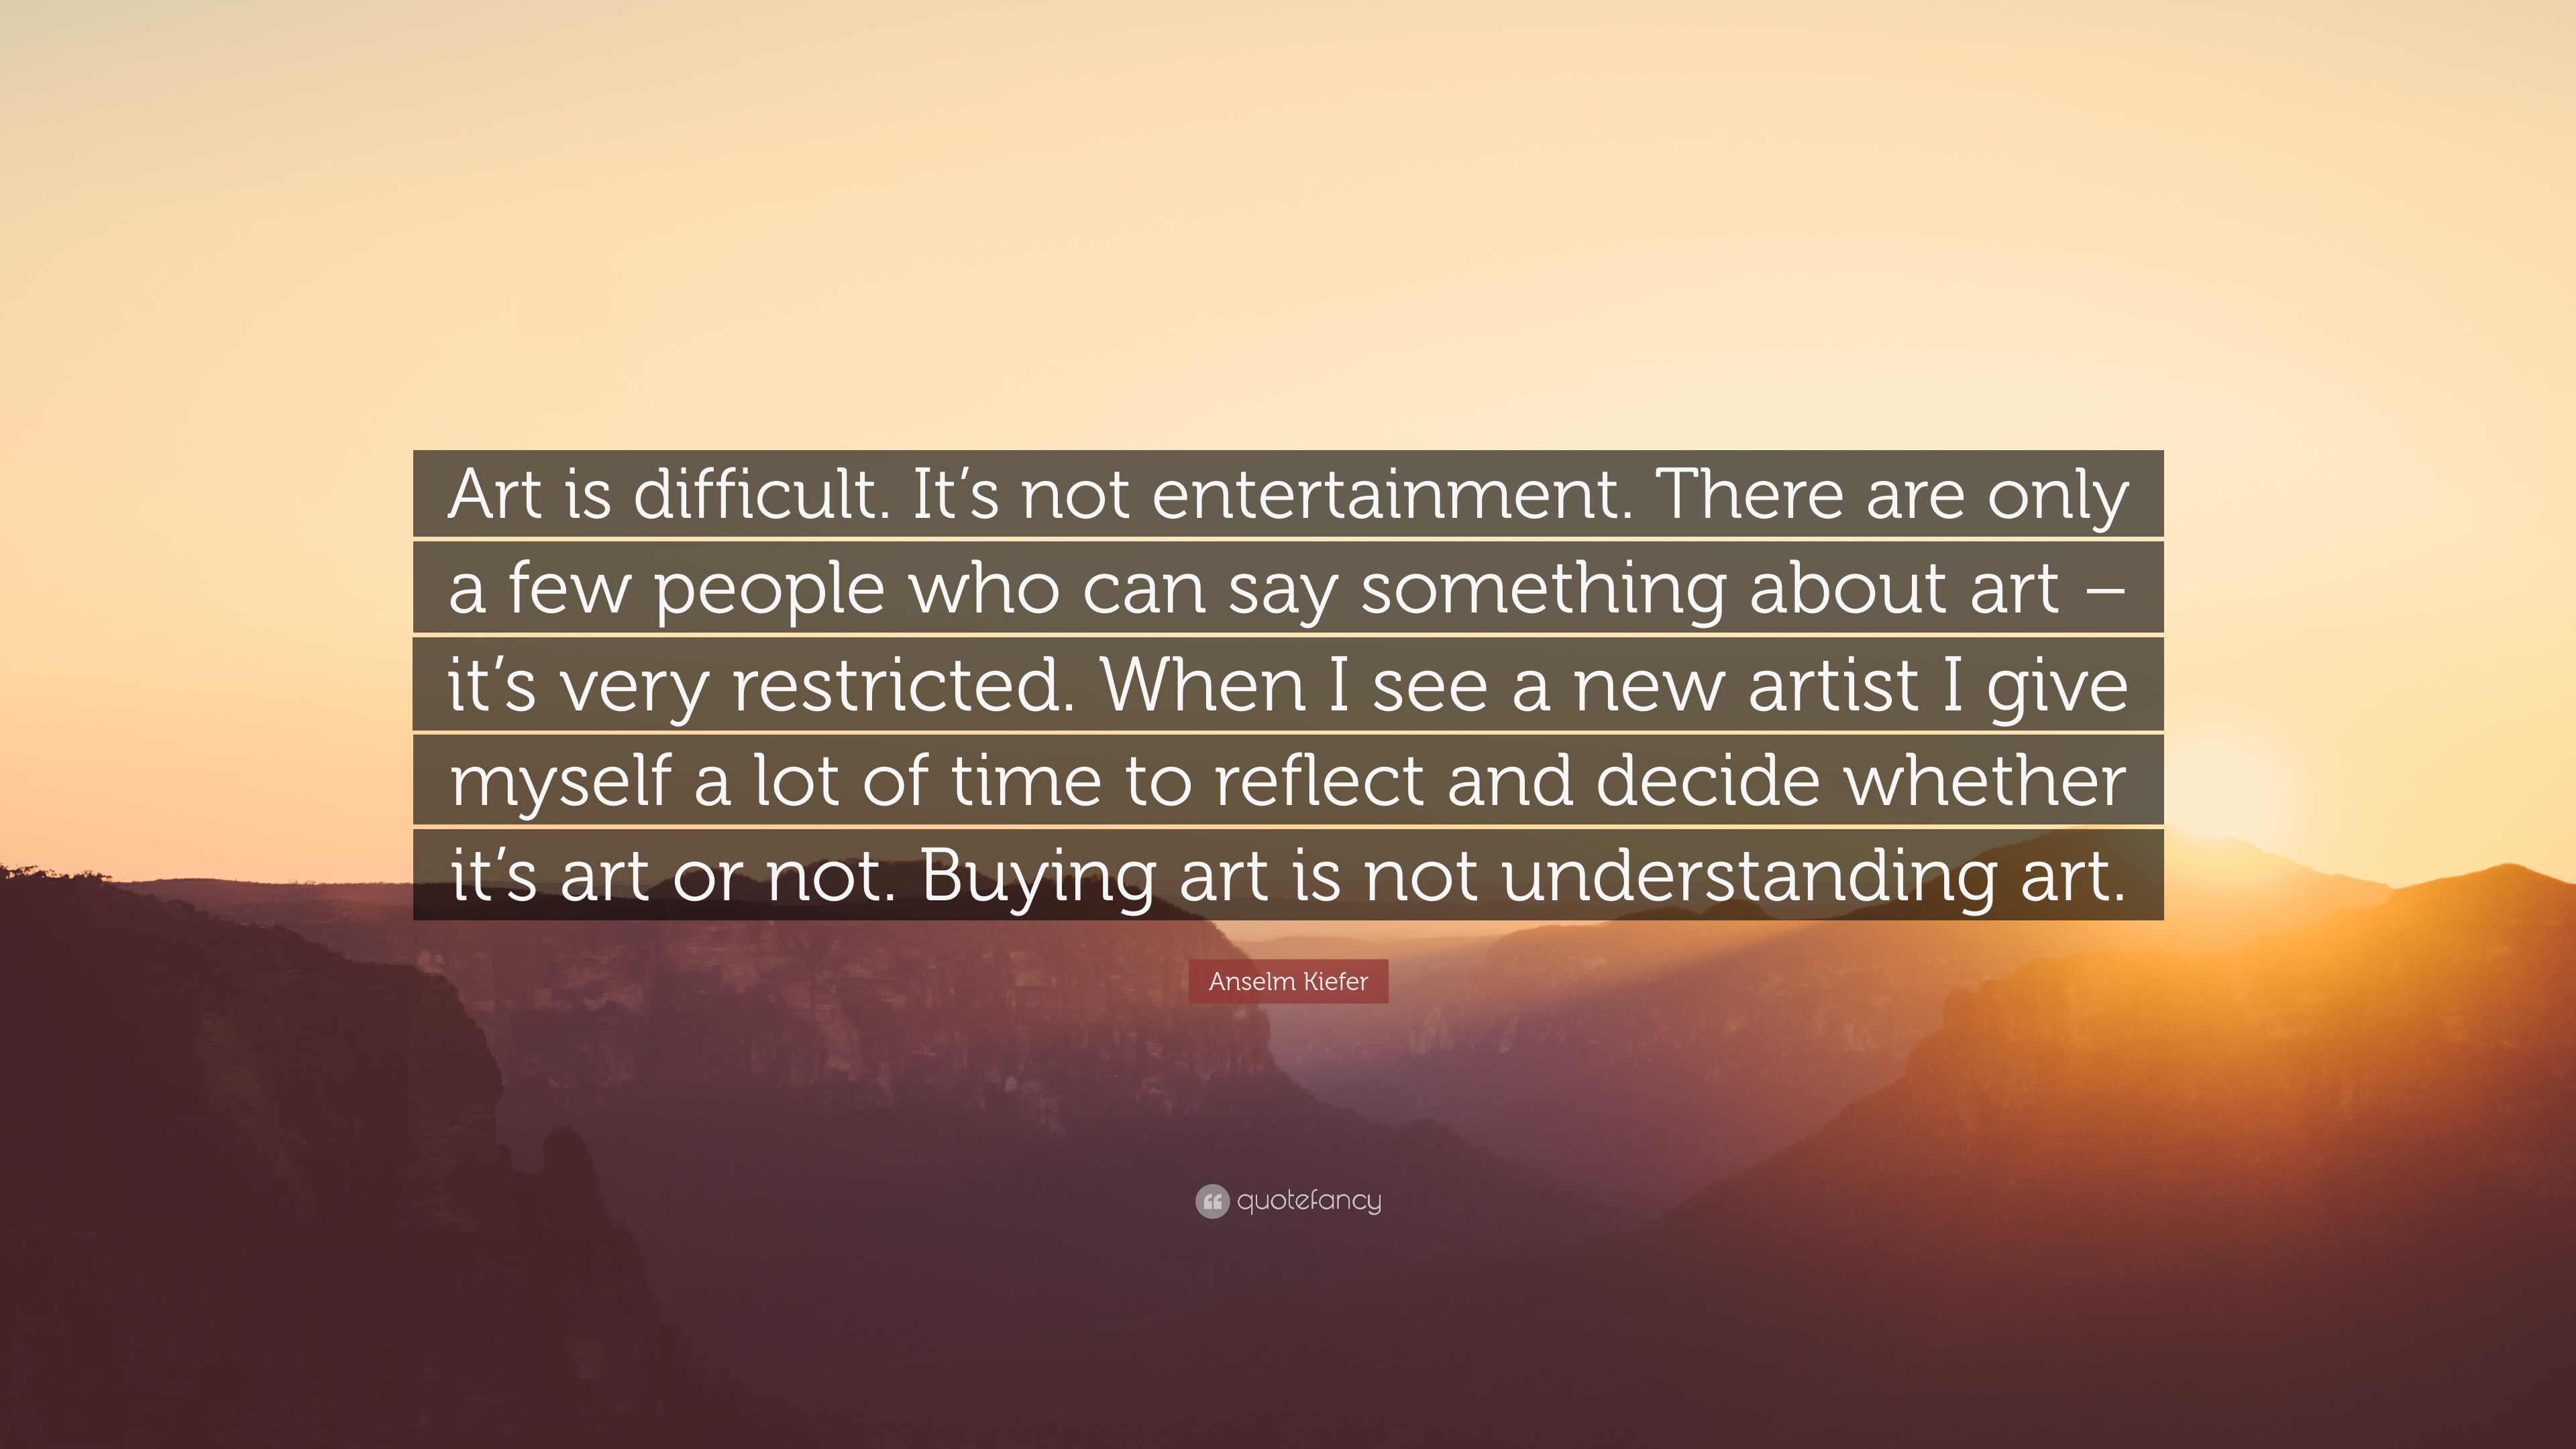 Why do people think art is difficult?